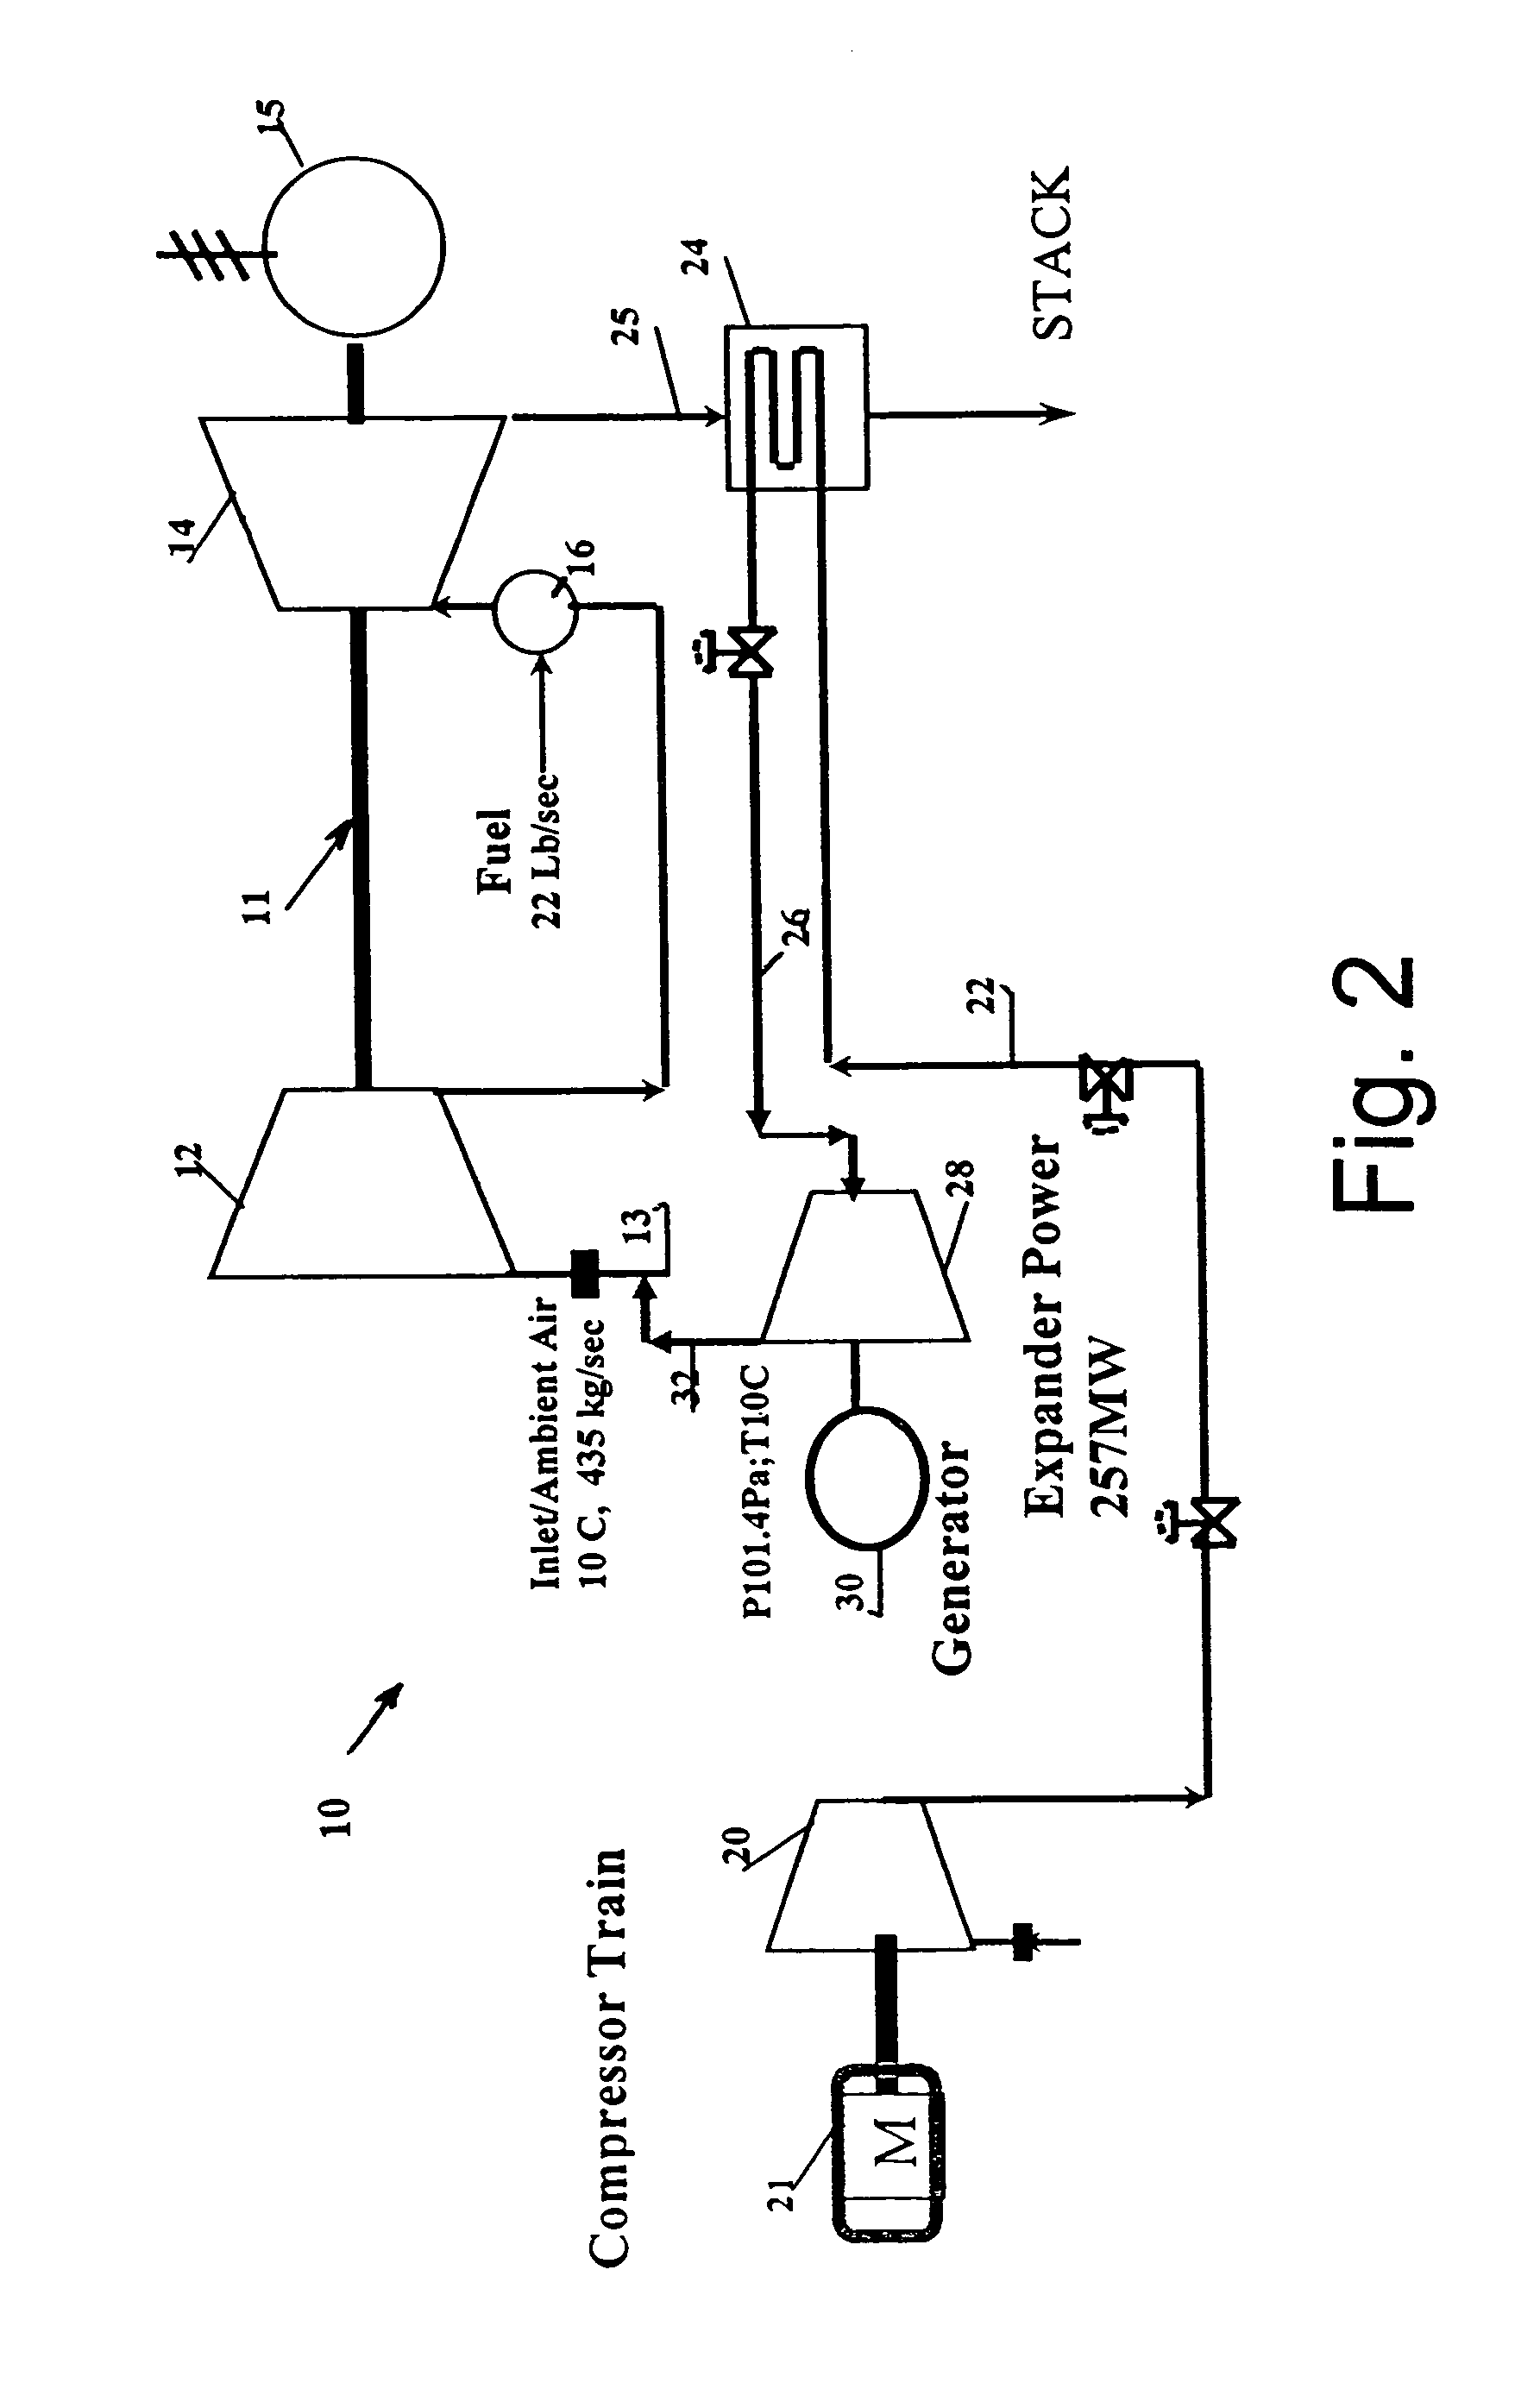 Power augmentation of combustion turbines by injection of cold air upstream of compressor